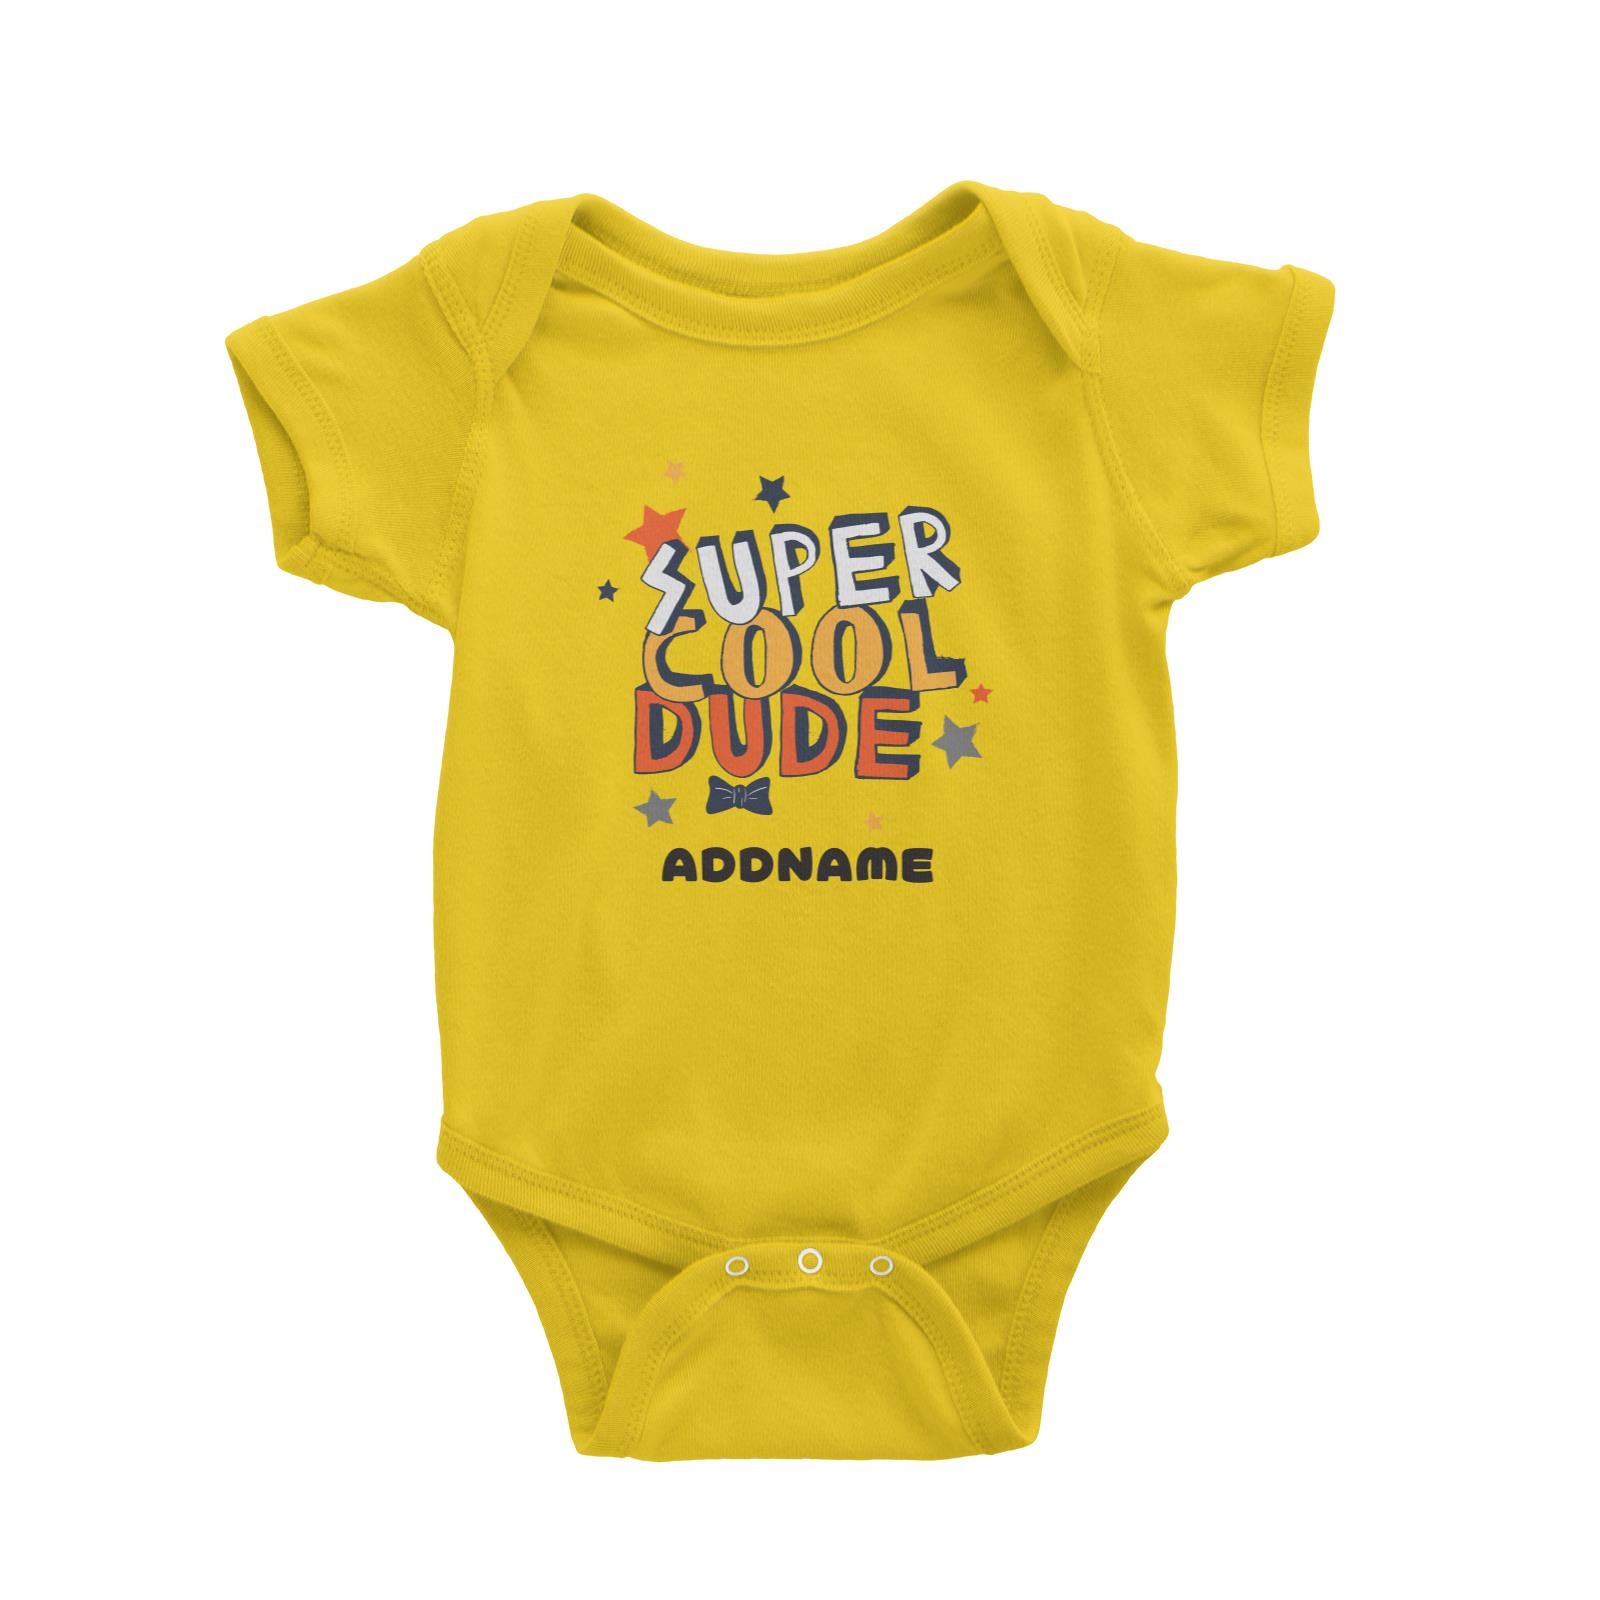 Super Cool Dude with Bow Tie Addname Baby Romper